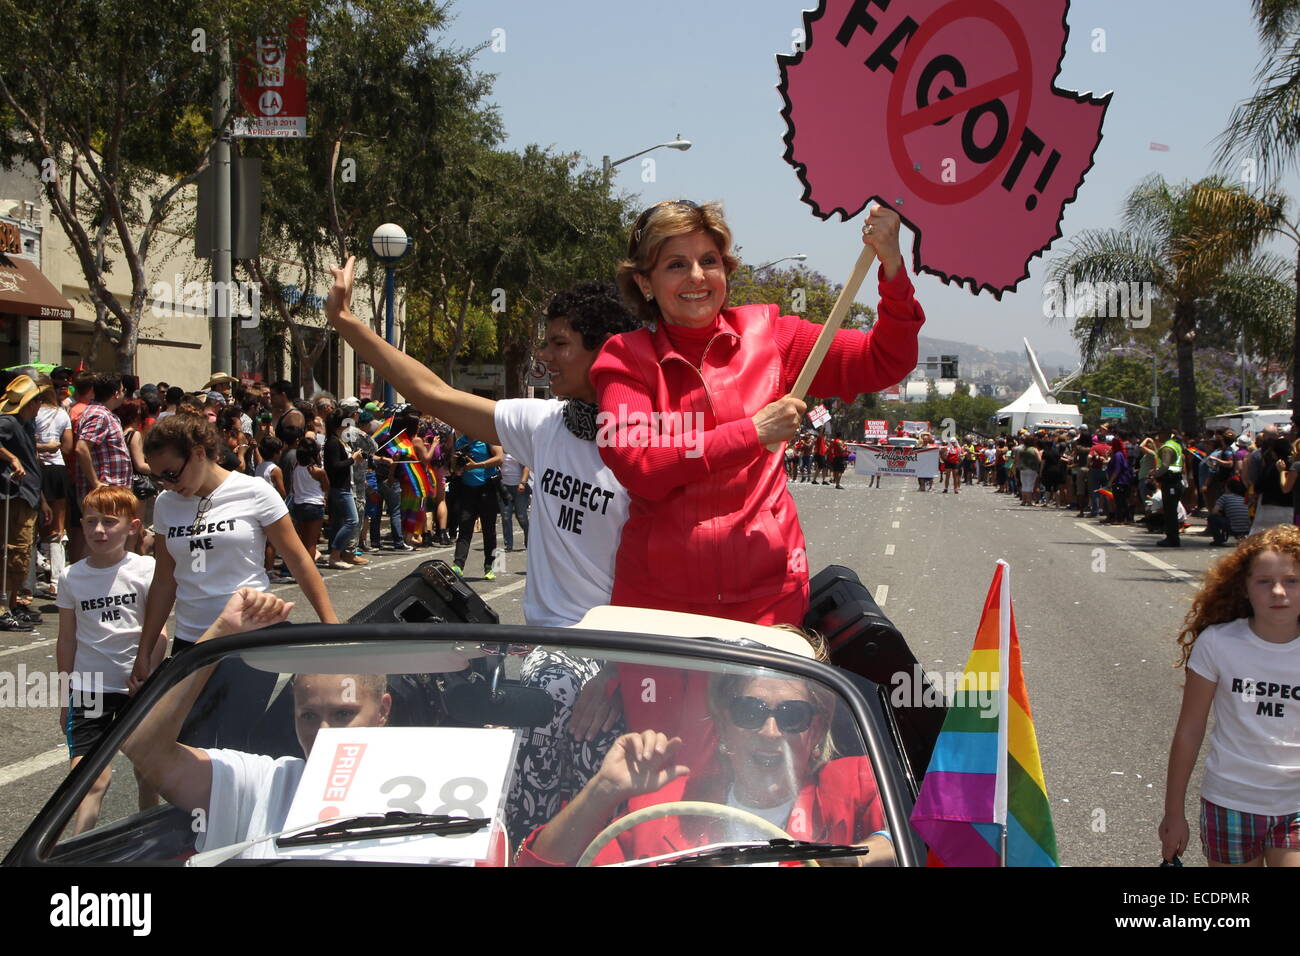 west-hollywood-gay-pride-parade-featuring-gloria-allred-where-west-ECDPMR.jpg